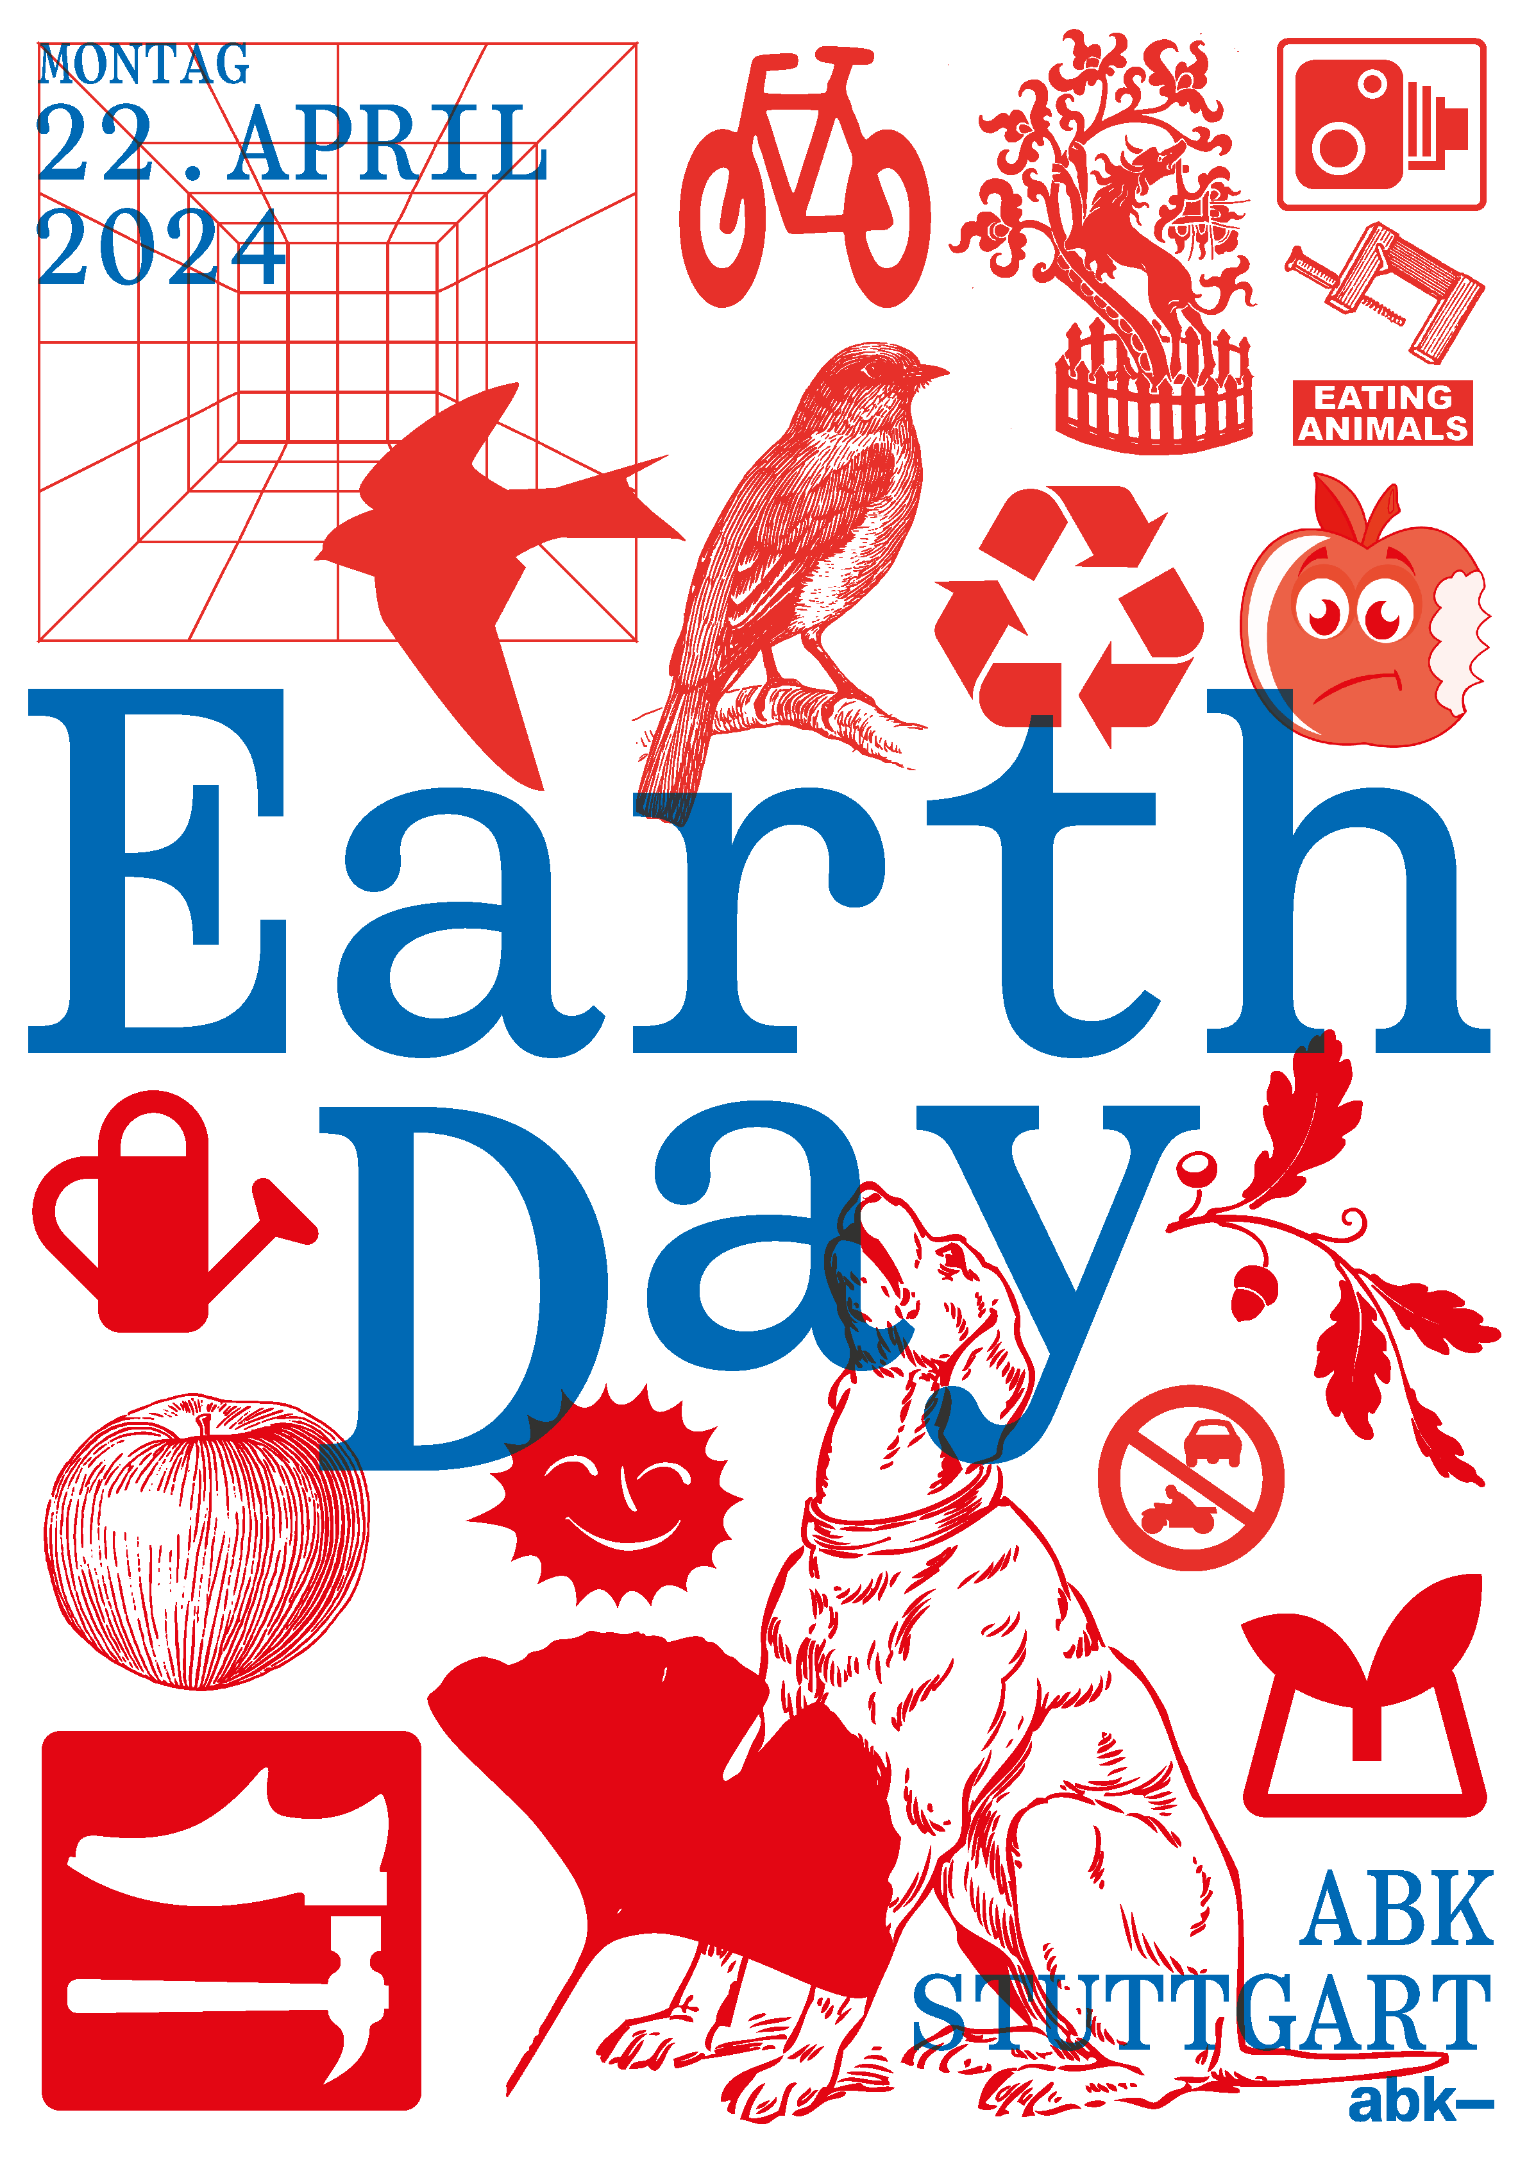 Call for participation! AKA EARTH DAY – 24H ECO-ACTIONS/PROJECTS 